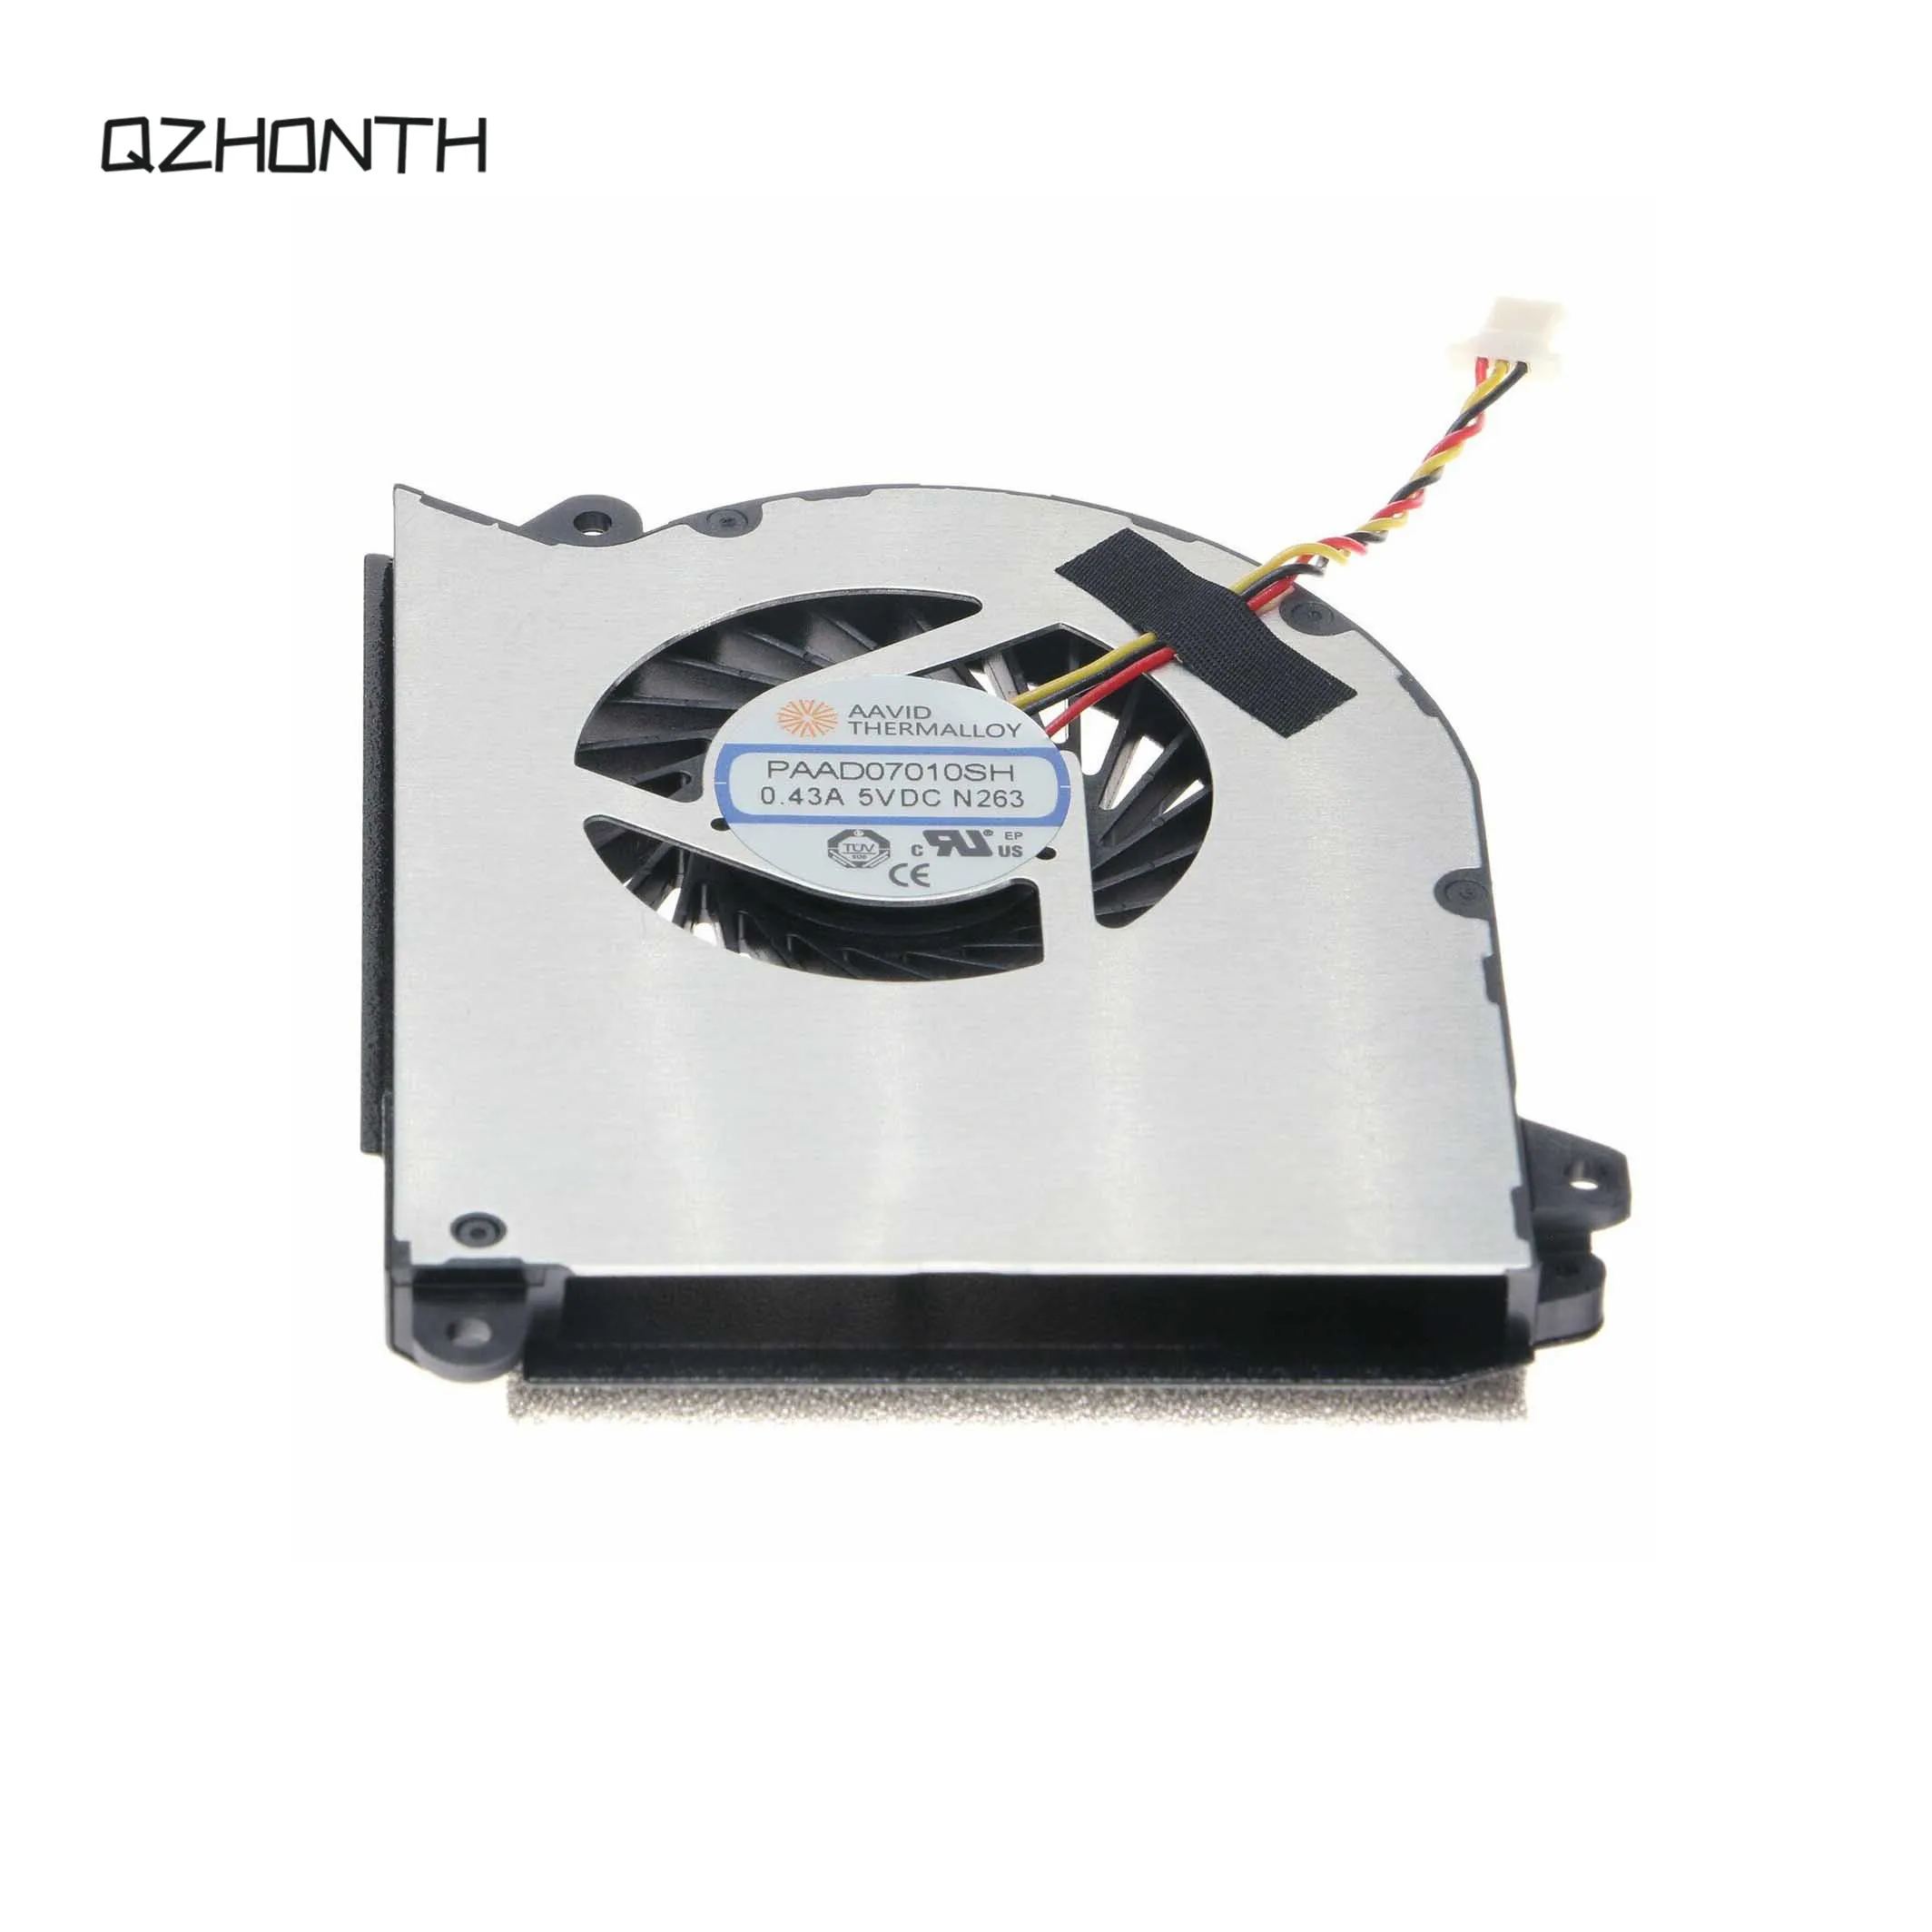 

Laptop CPU Fan For MSI GS30 GS30-2M MS-13F1 PAAD07010SH N263